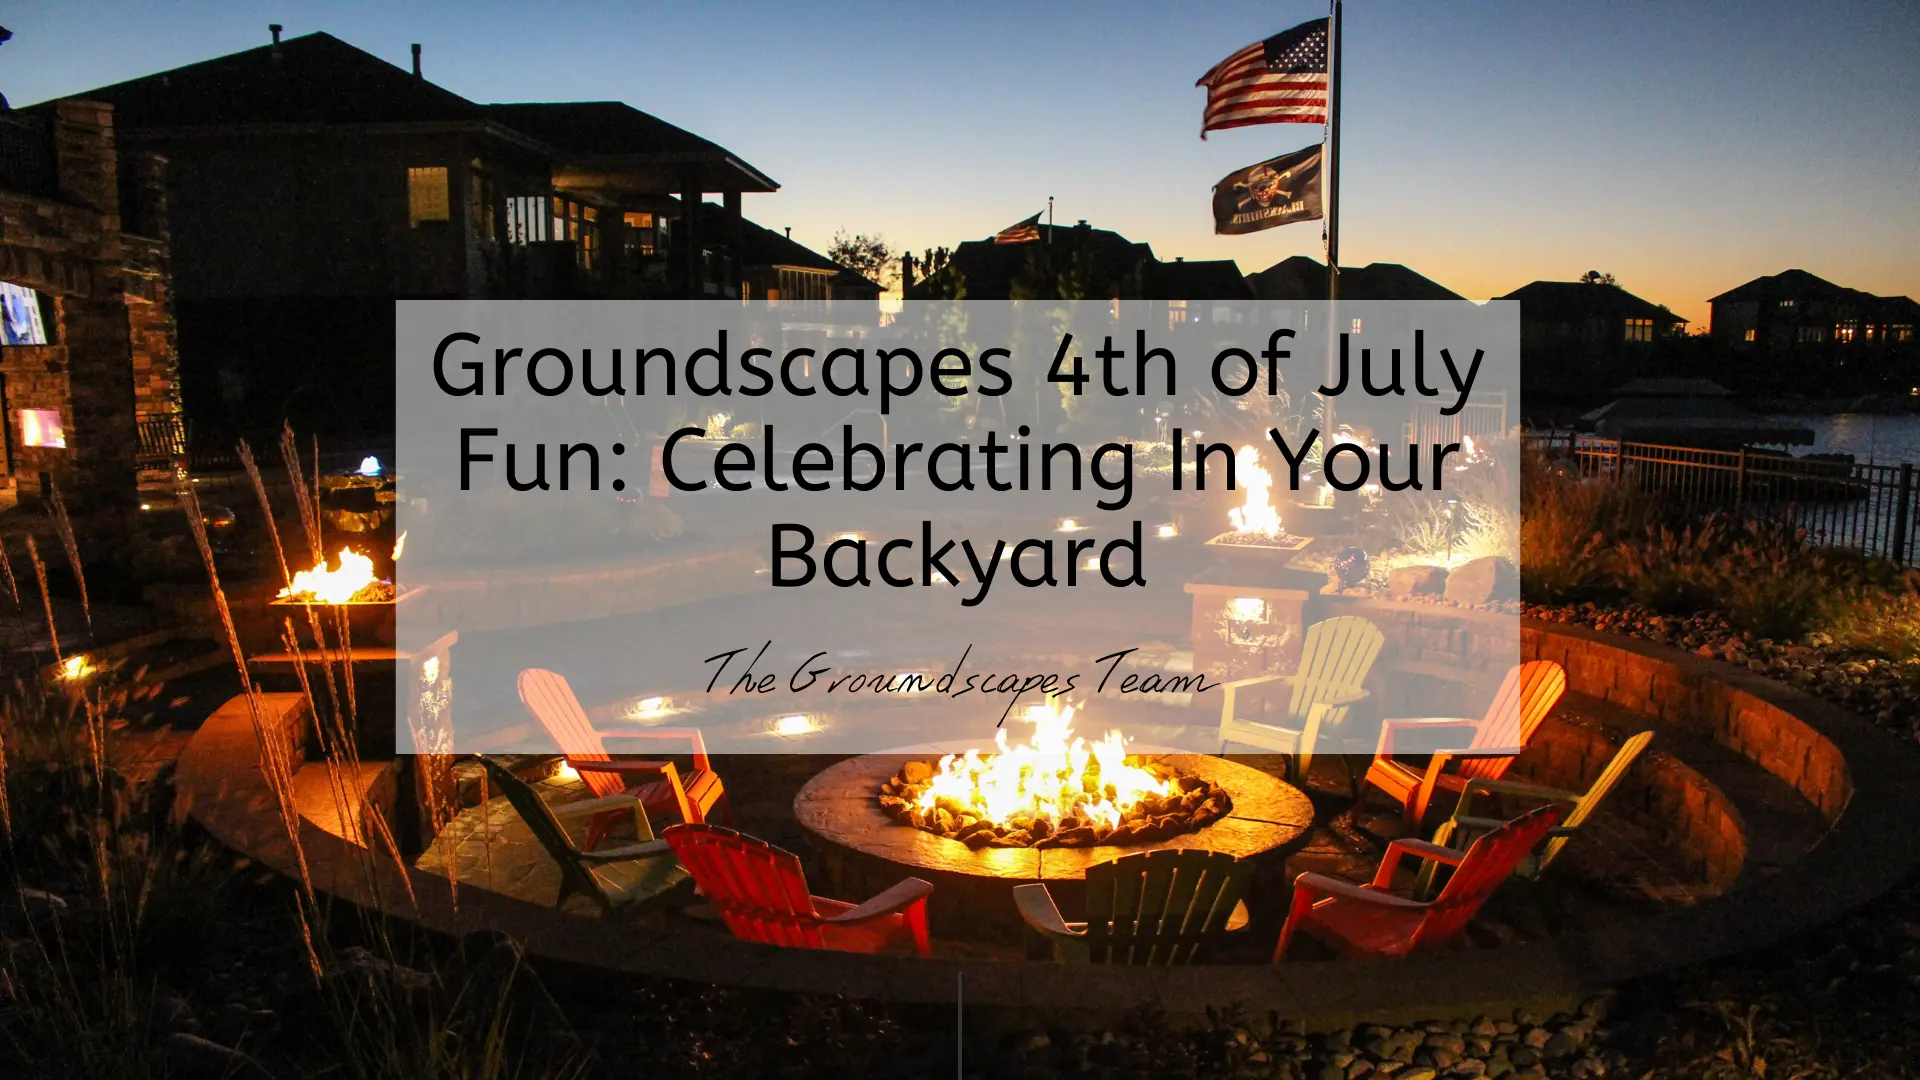 Groundscapes 4th of July Fun: Celebrating In Your Backyard